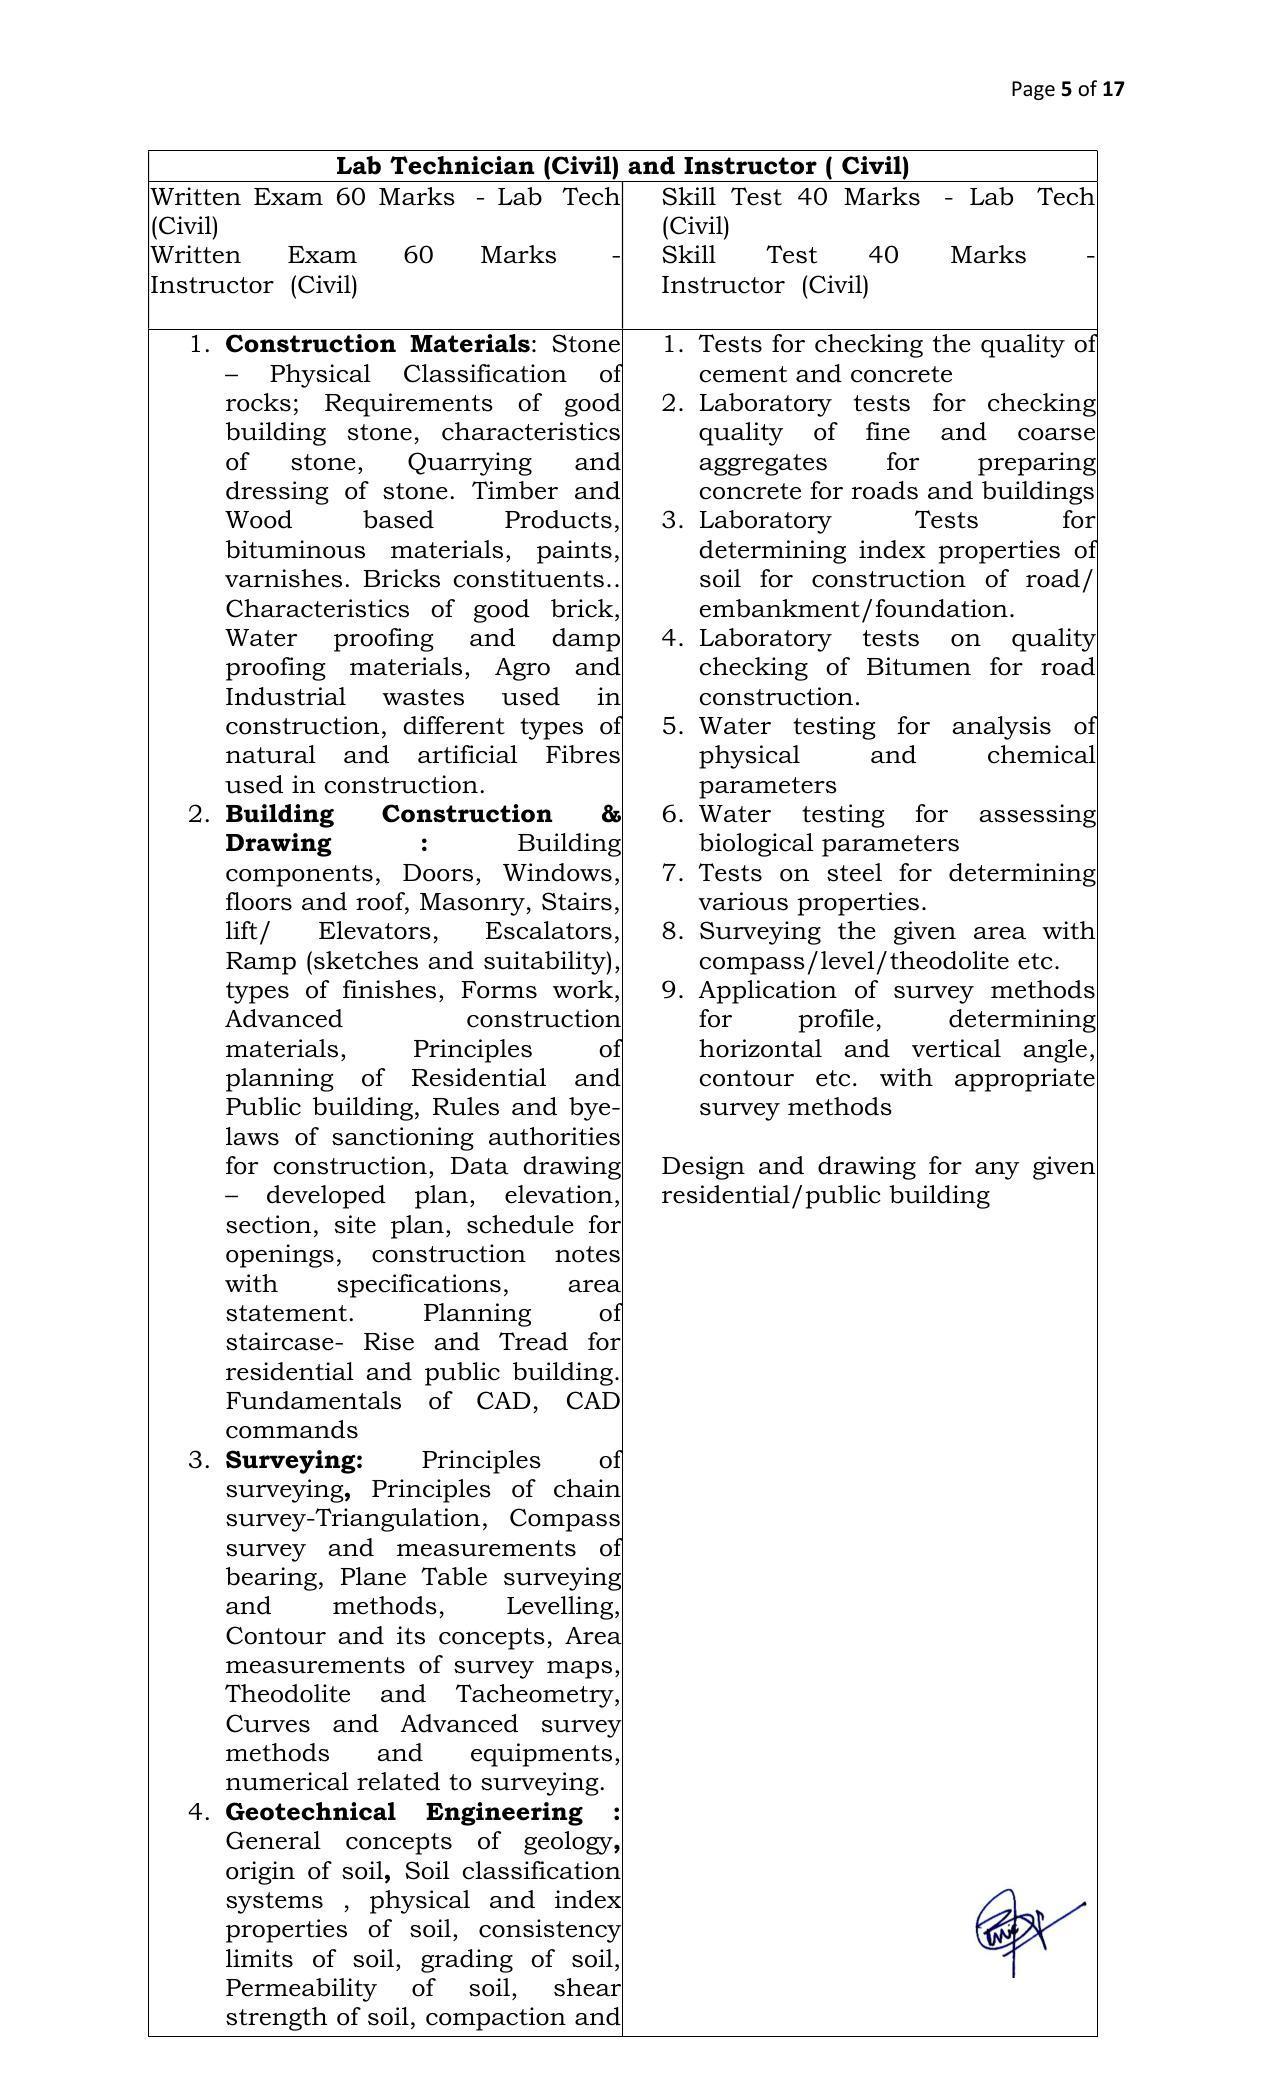 DBRAIT Invites Application for Lab Technician, Instructor Recruitment 2022 - Page 9